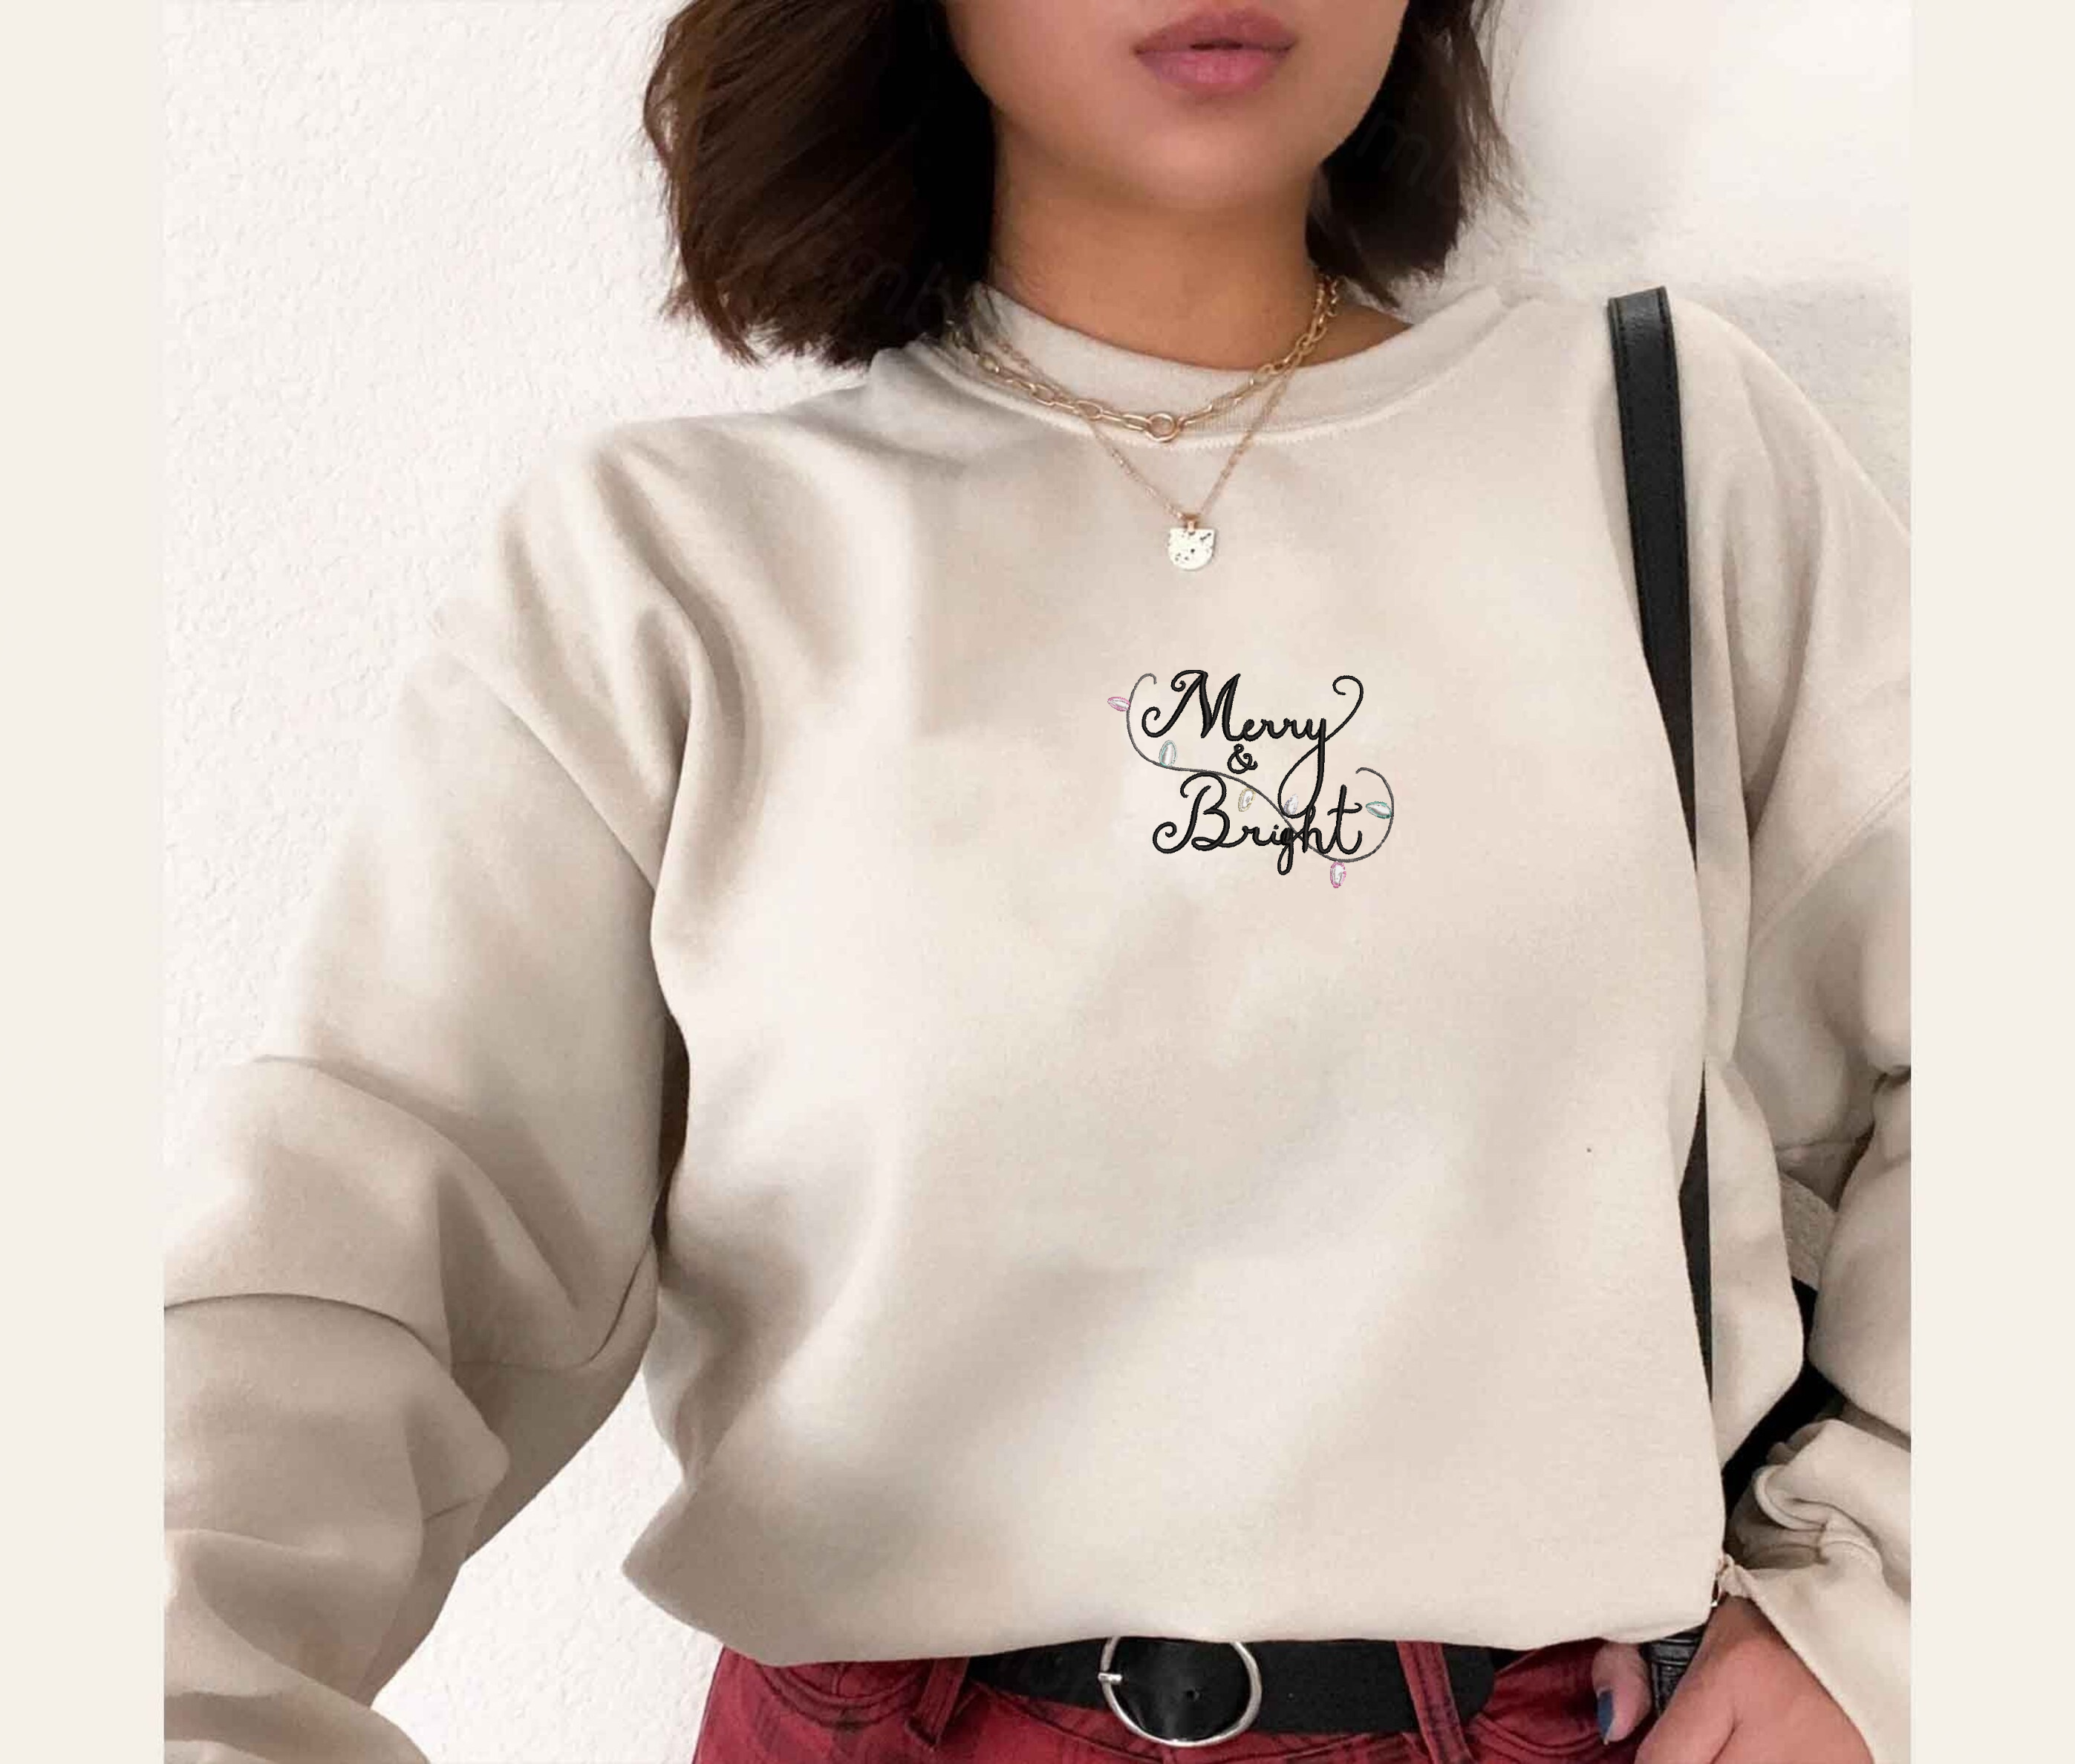 Hoodie - & Merry Christmas Sweatshirt, Bright Embroly Embroidered